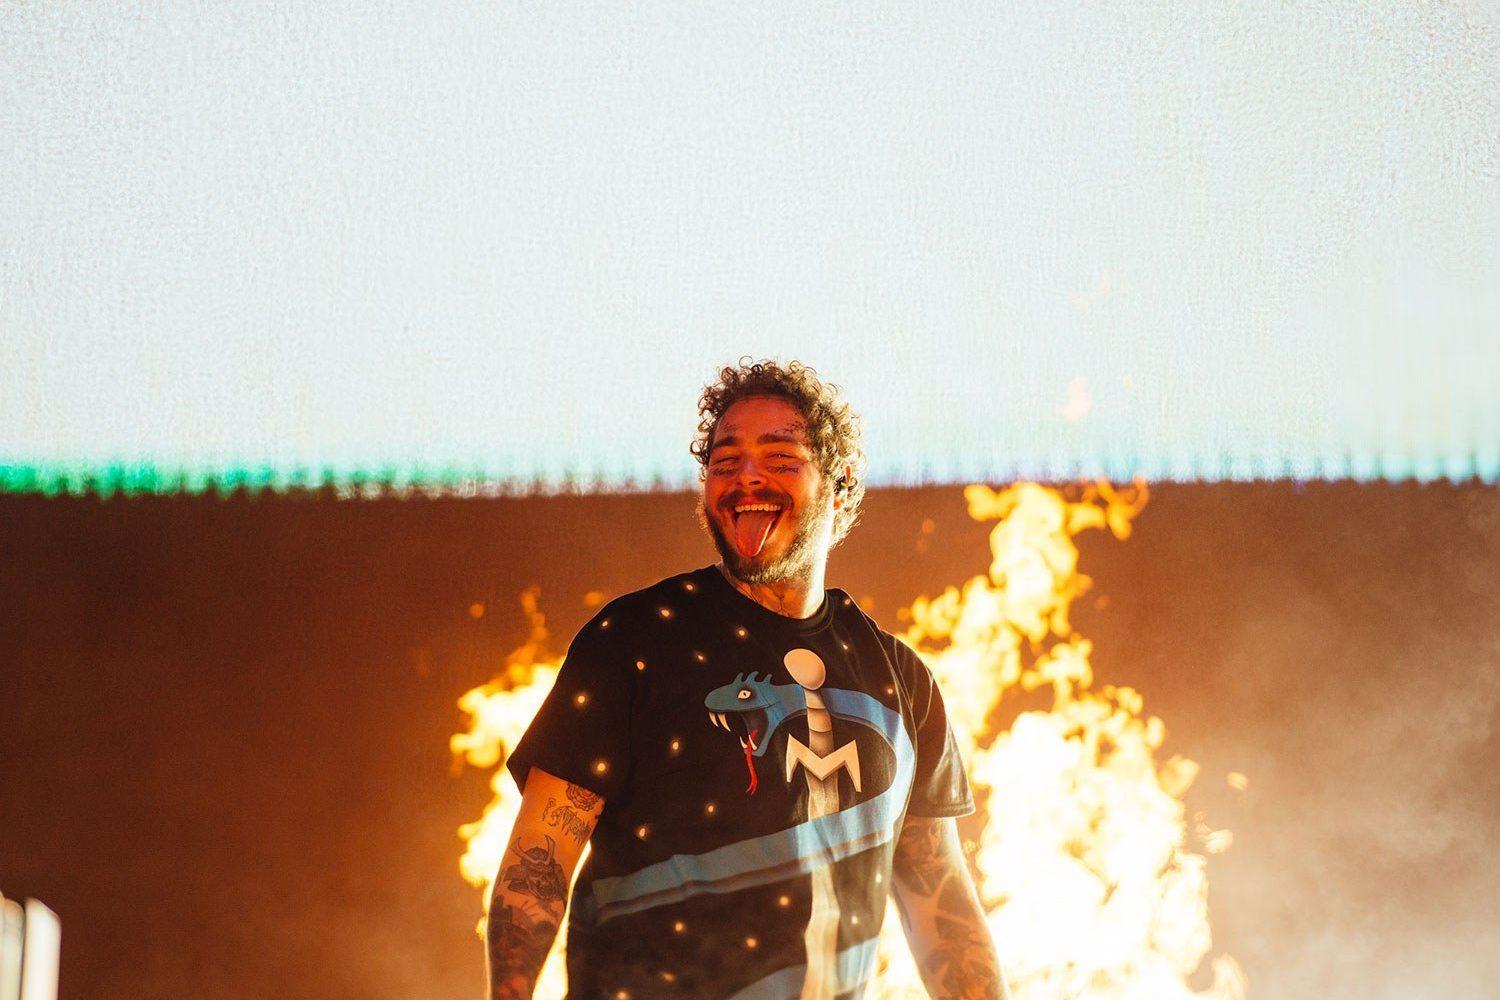 Post Malone Drops New Indie Pop Single “Circles” From